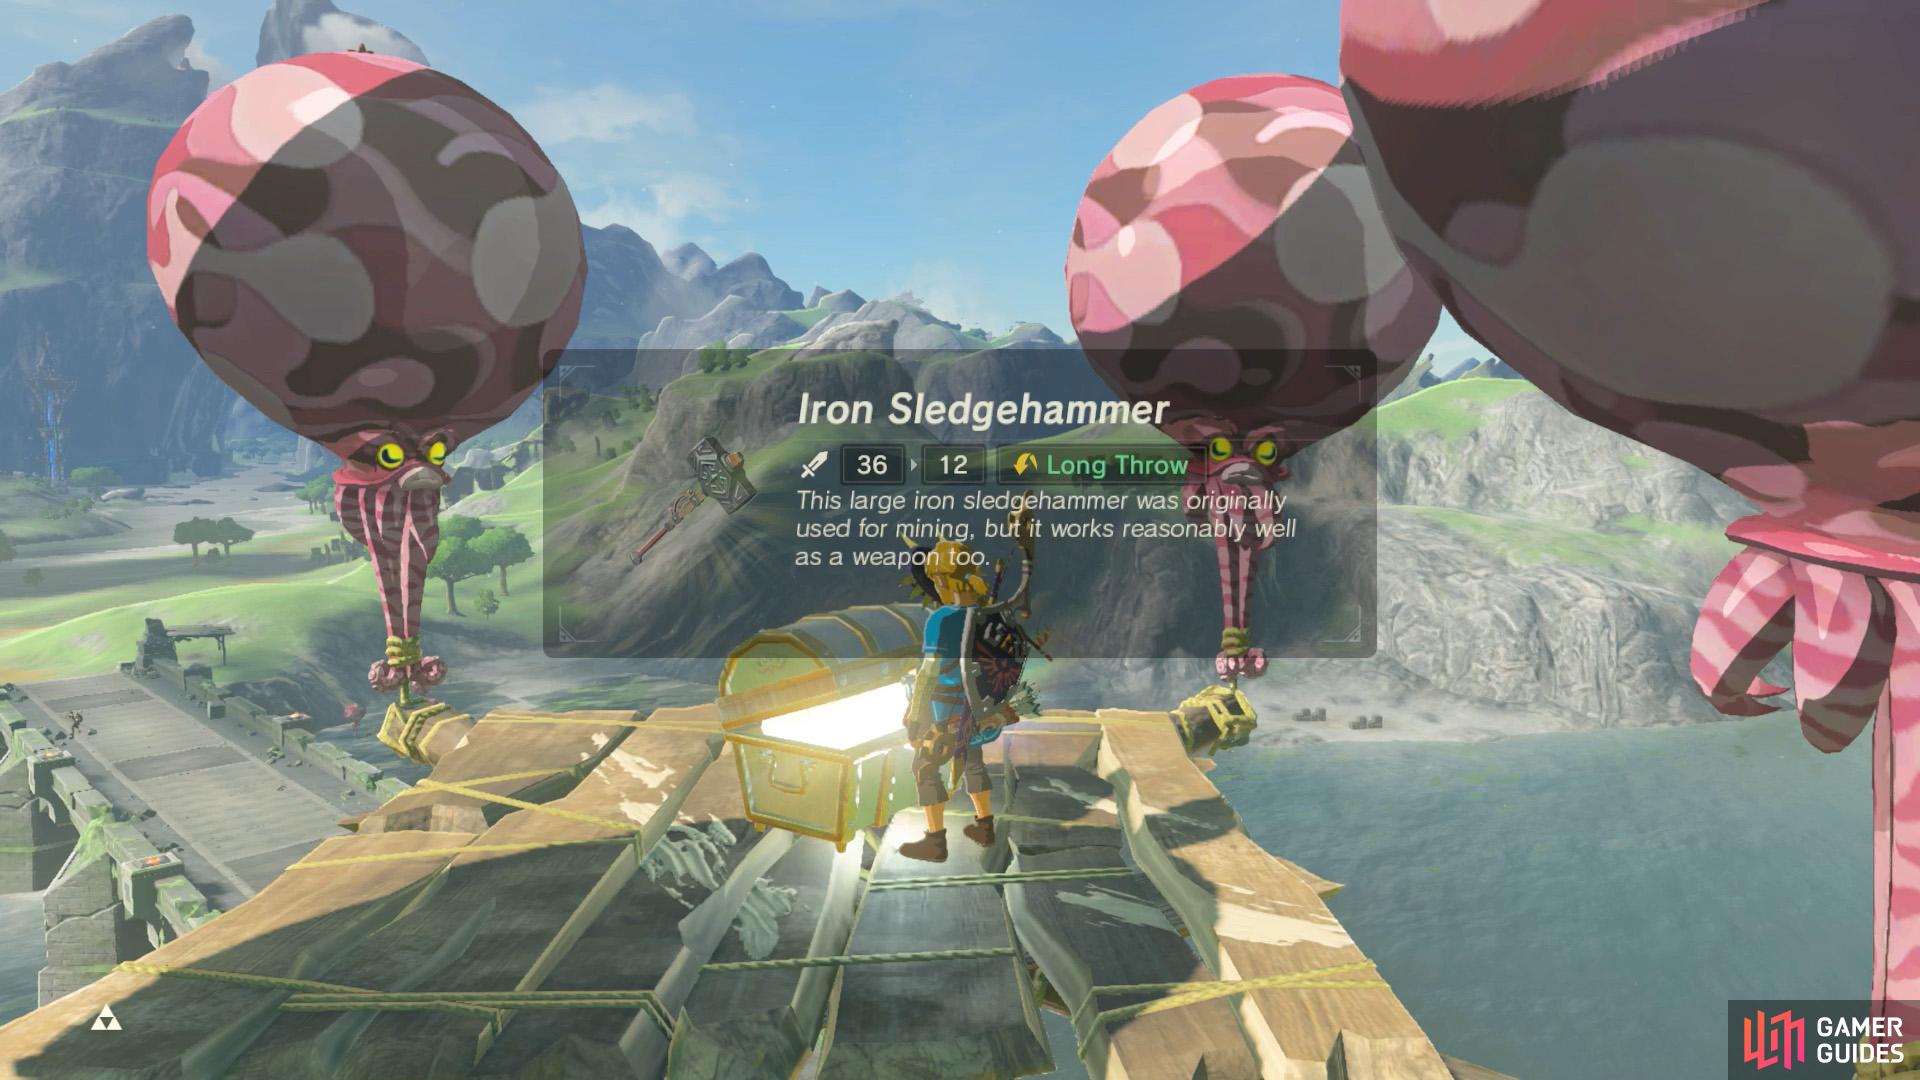 However, you can glide down from the nearby flagpole, stamina permitting.